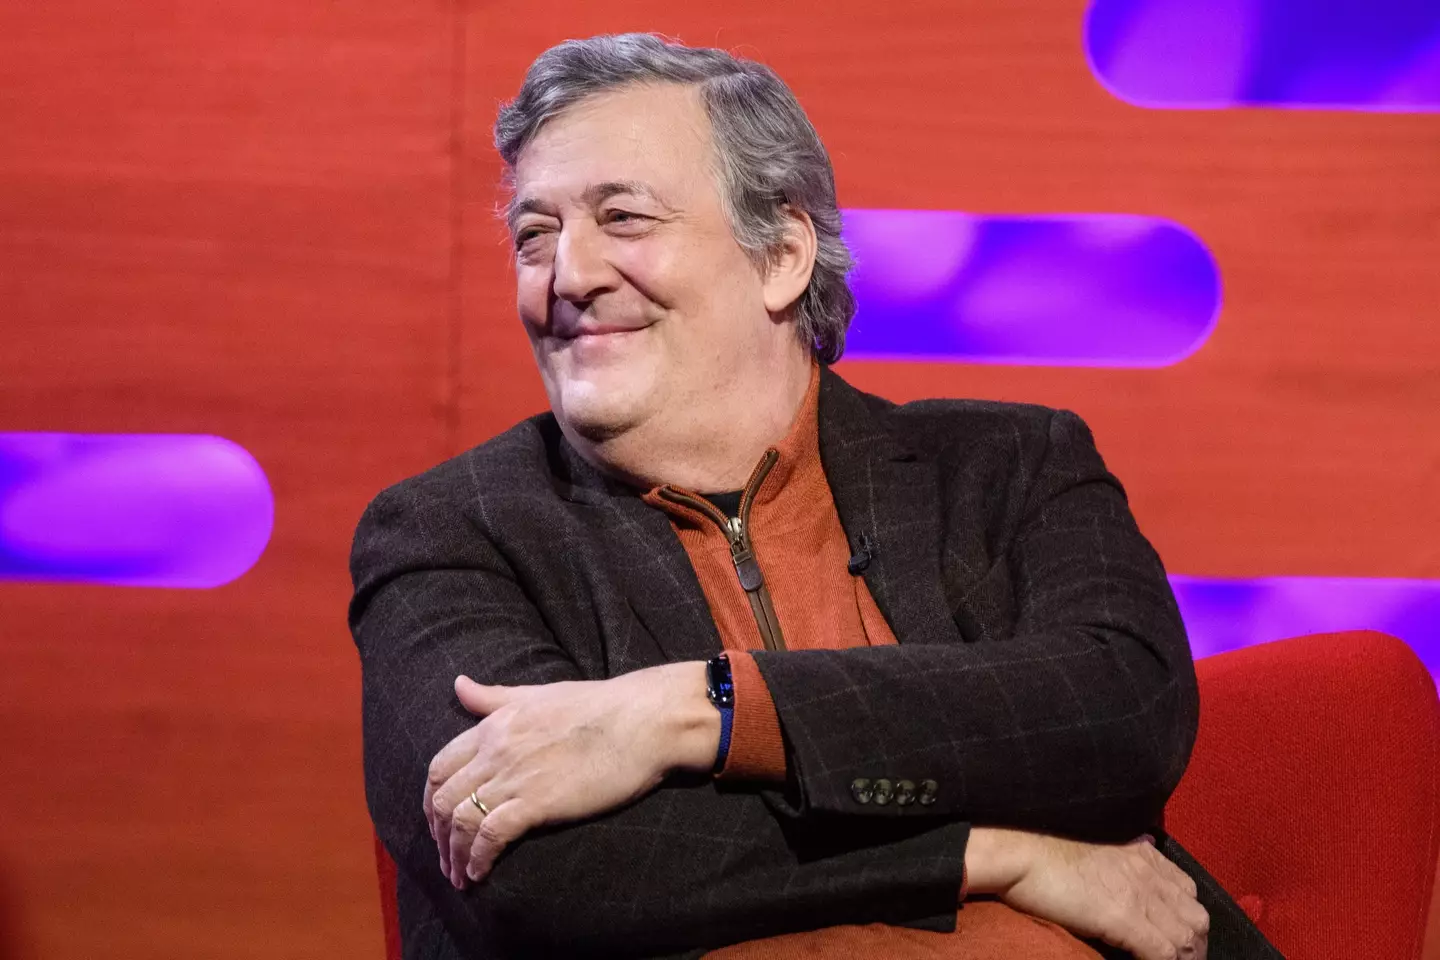 Stephen Fry is part of the Heartstopper cast. (